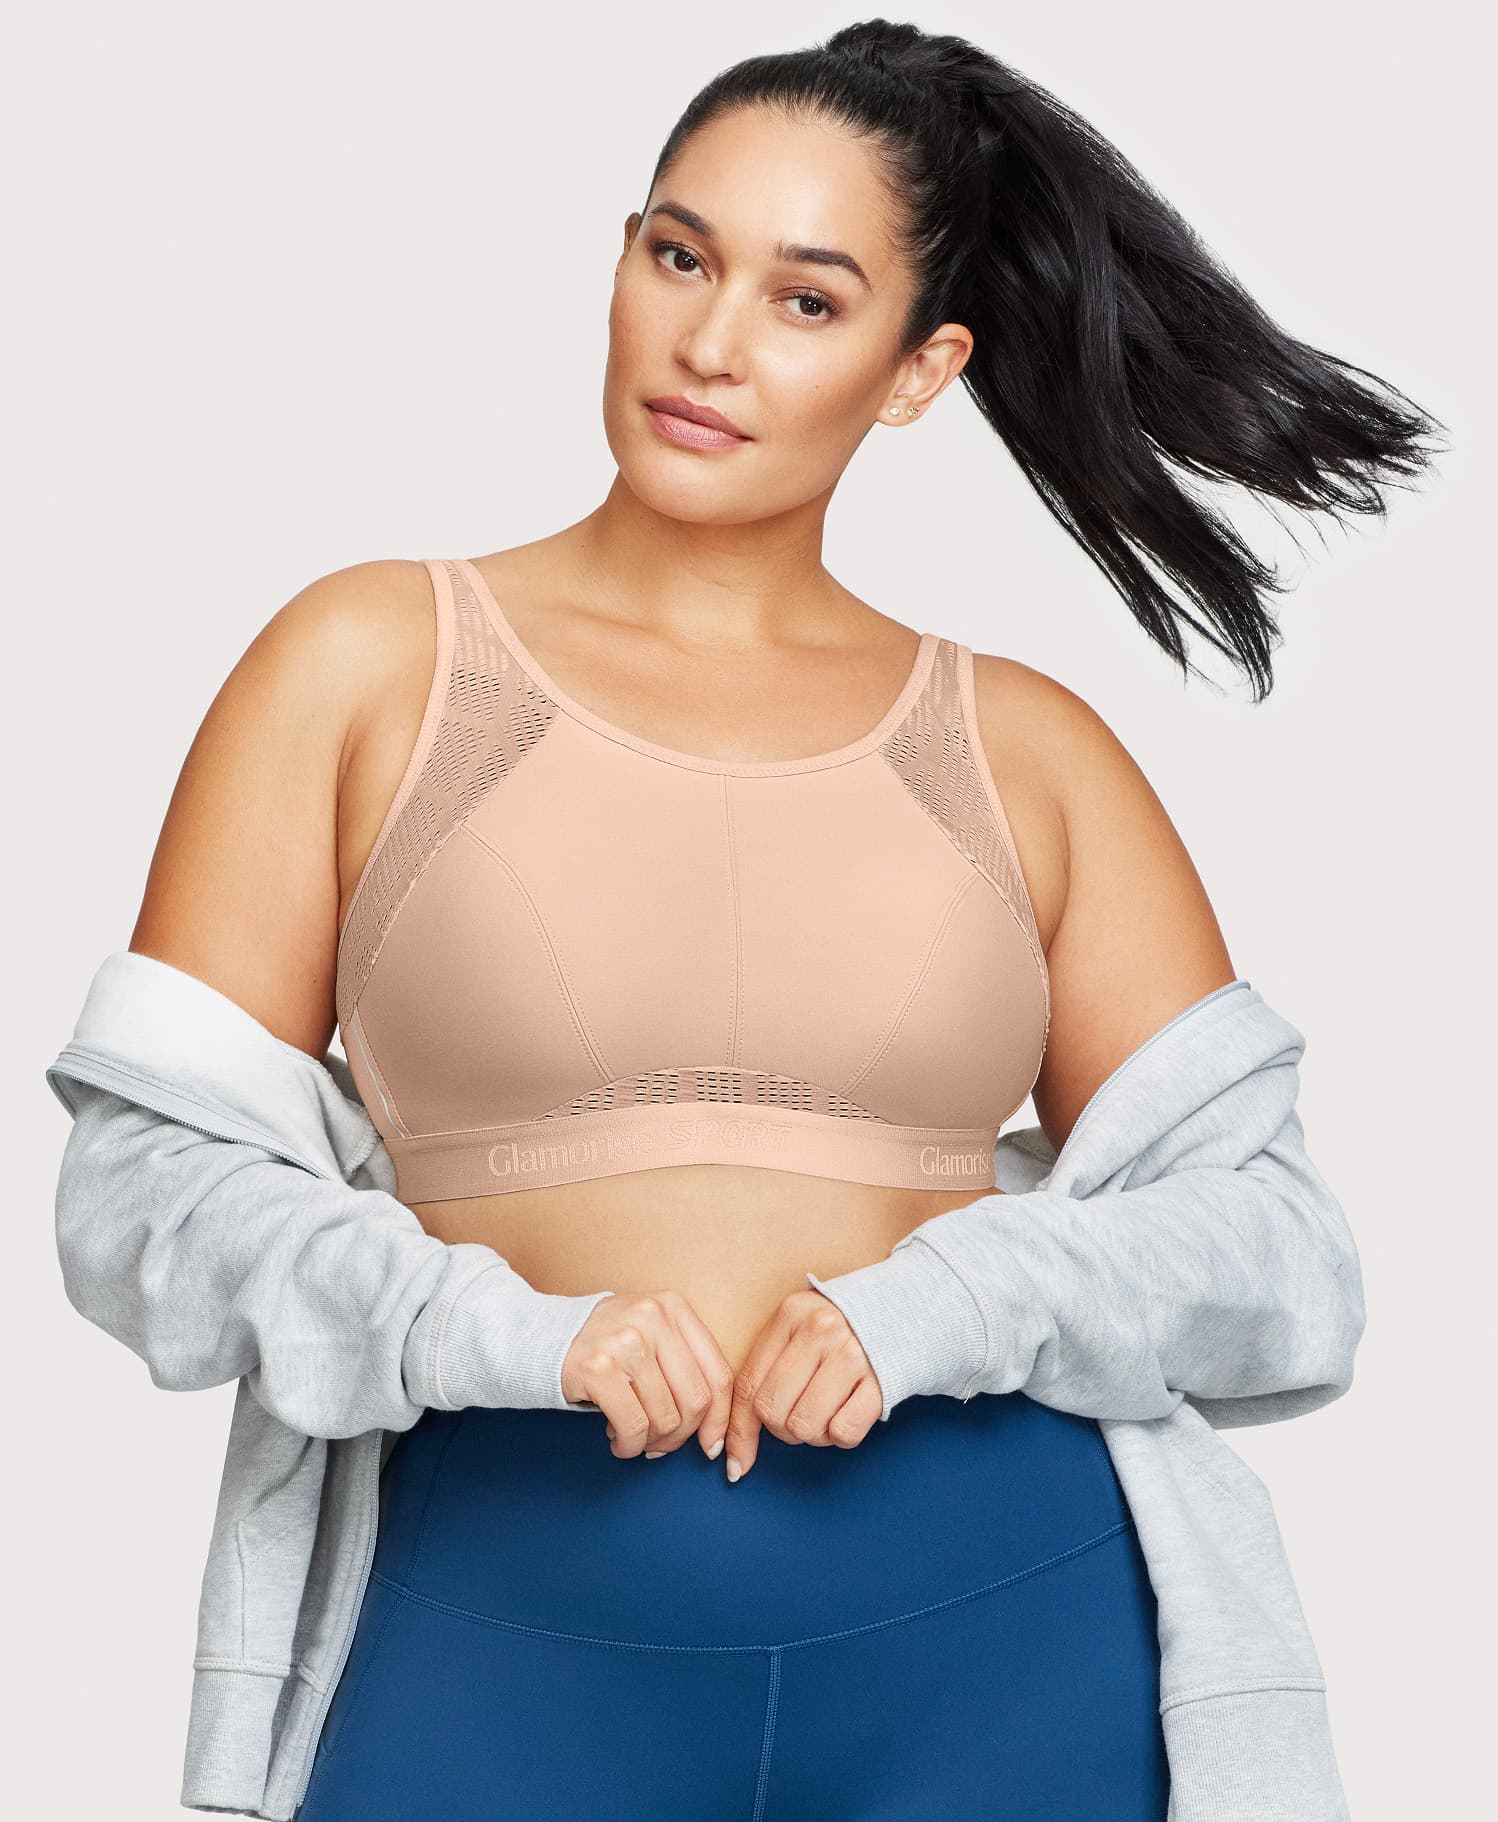 Glamorise Women's Plus Size T-Shirt Bra with Seamless Straps Rose Size 44H  s for sale online